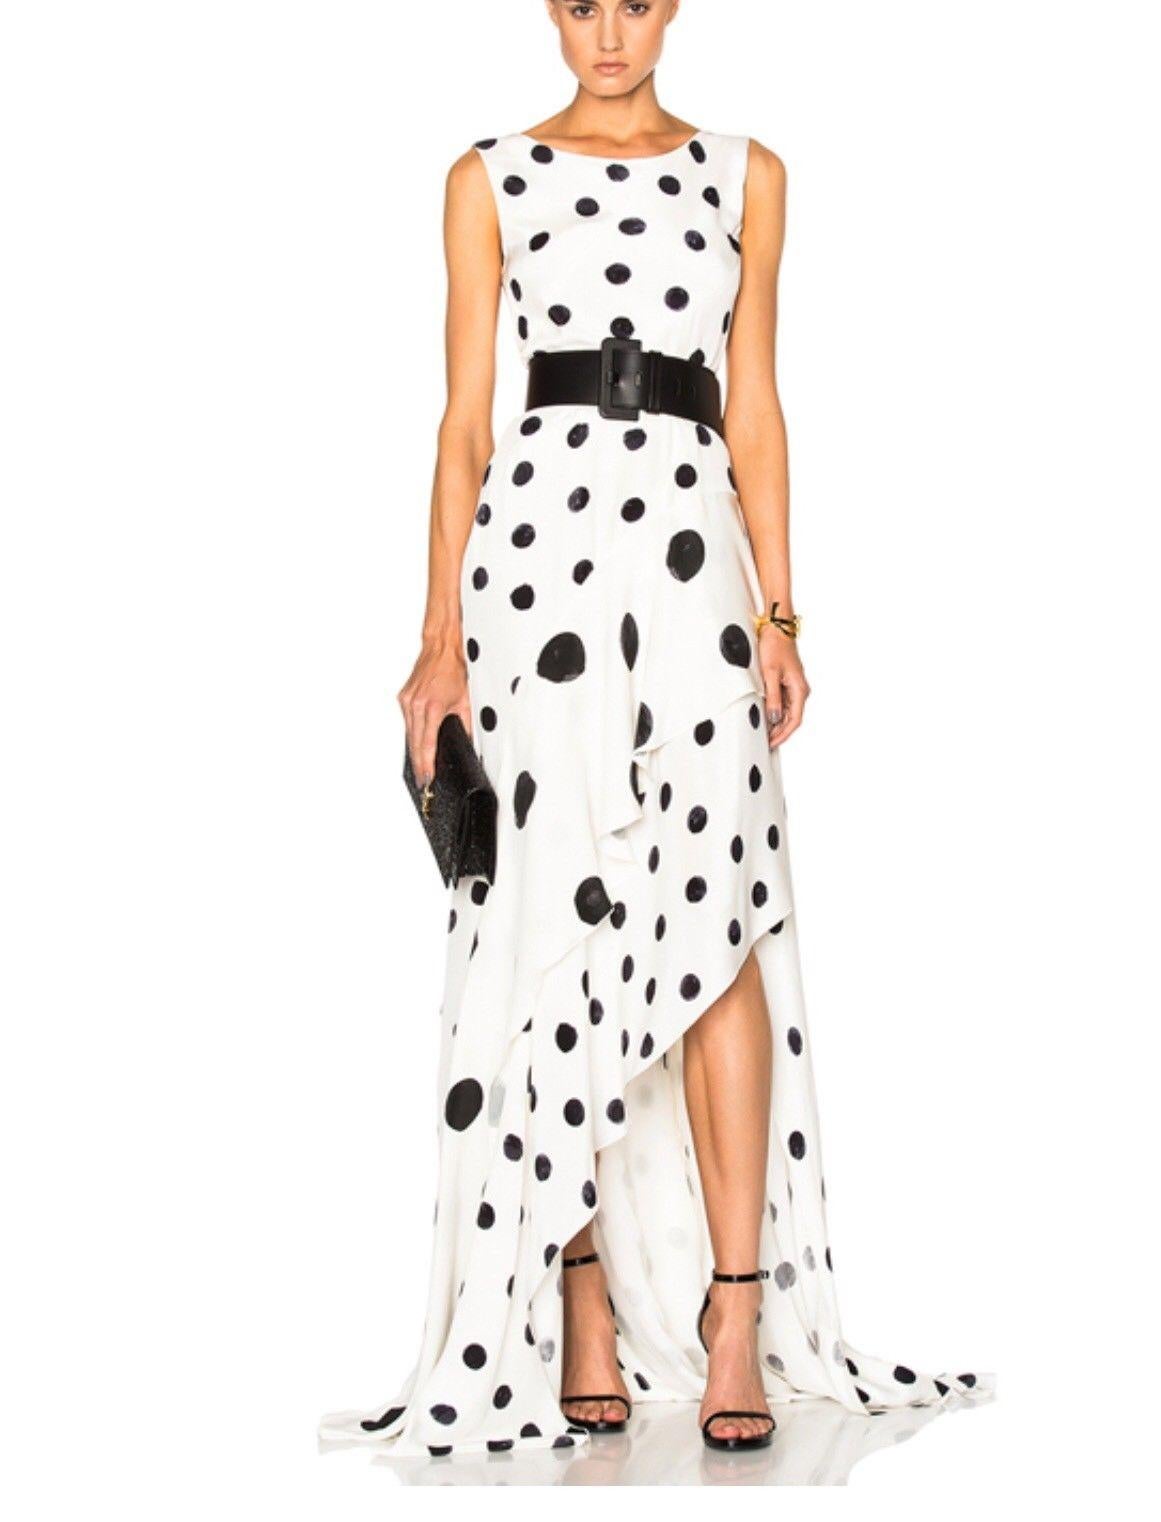 New Oscar De La Renta White Polka Dot Silk Crepe Tiered Skirt Dress Gown size 4 In New Condition For Sale In Montgomery, TX